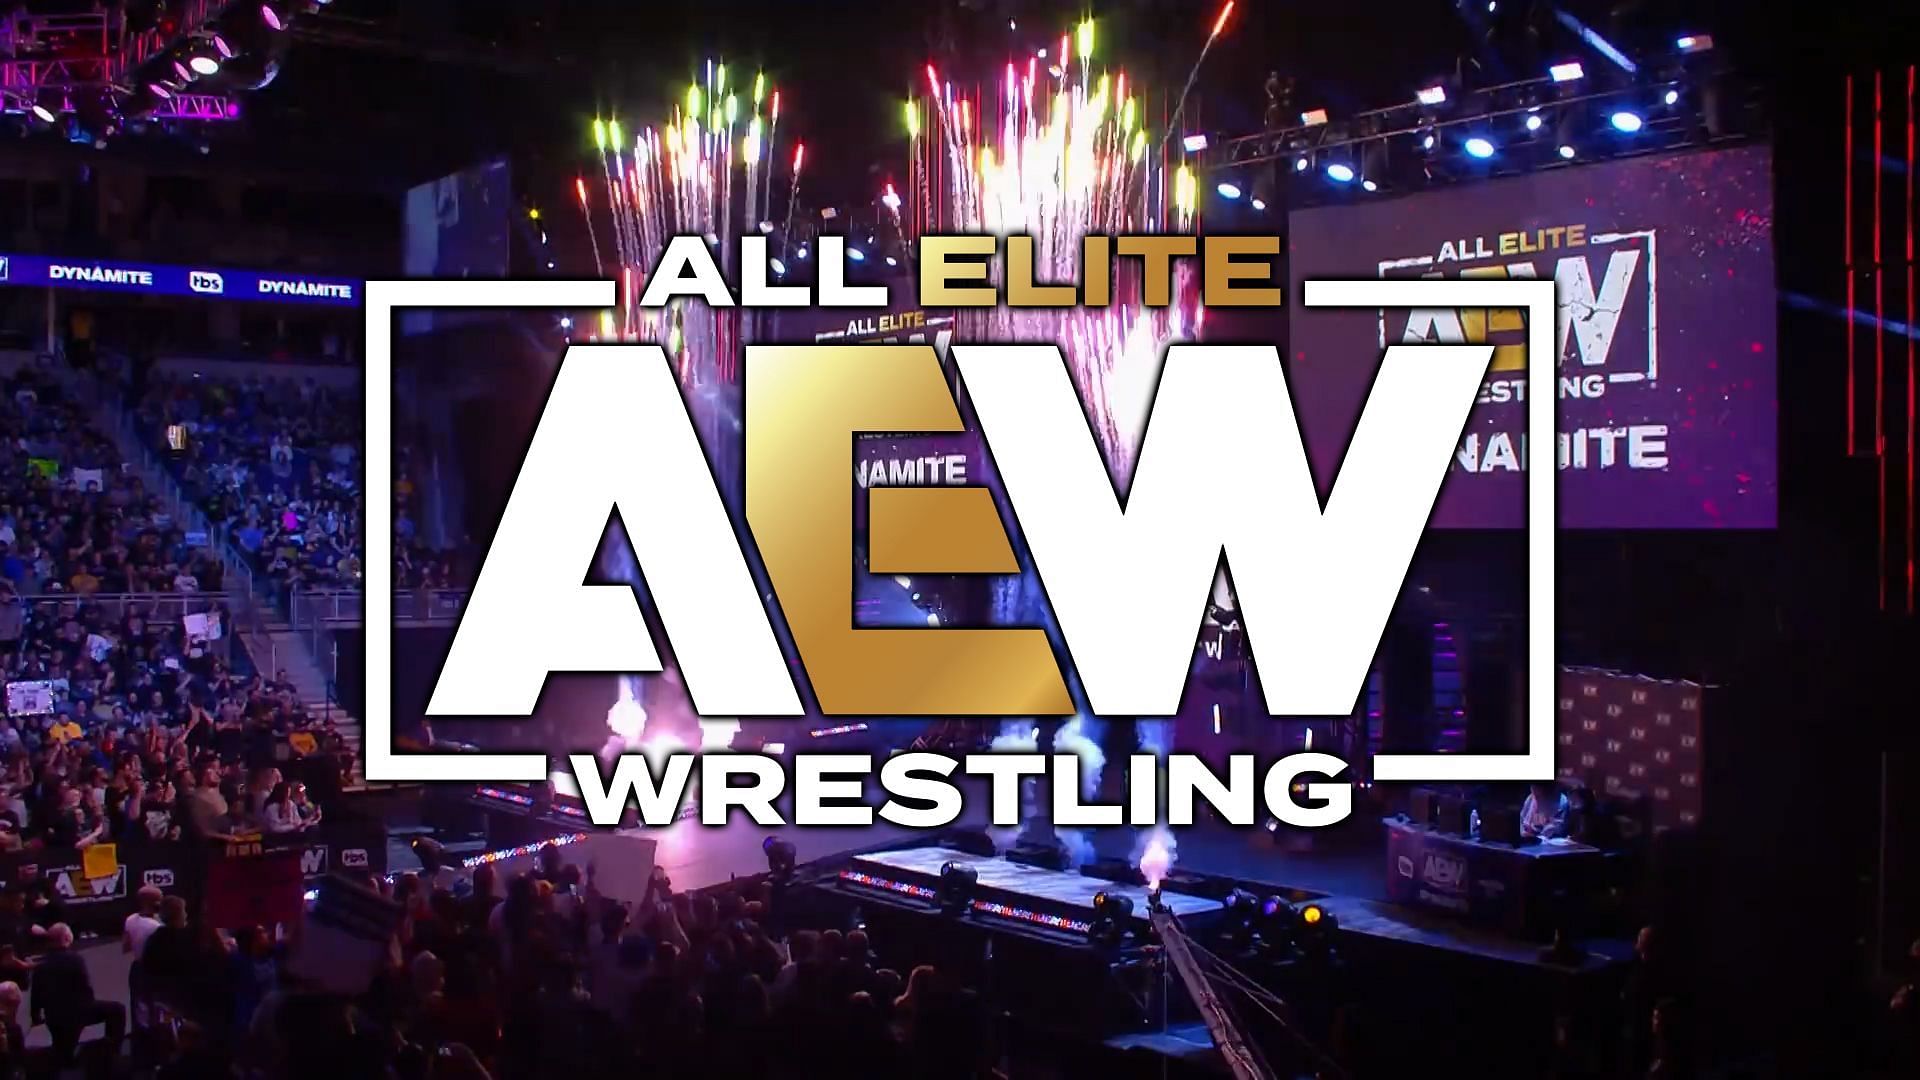 AEW is set for a major episode of Dynamite (image credit: All Elite Wrestling on YouTube)